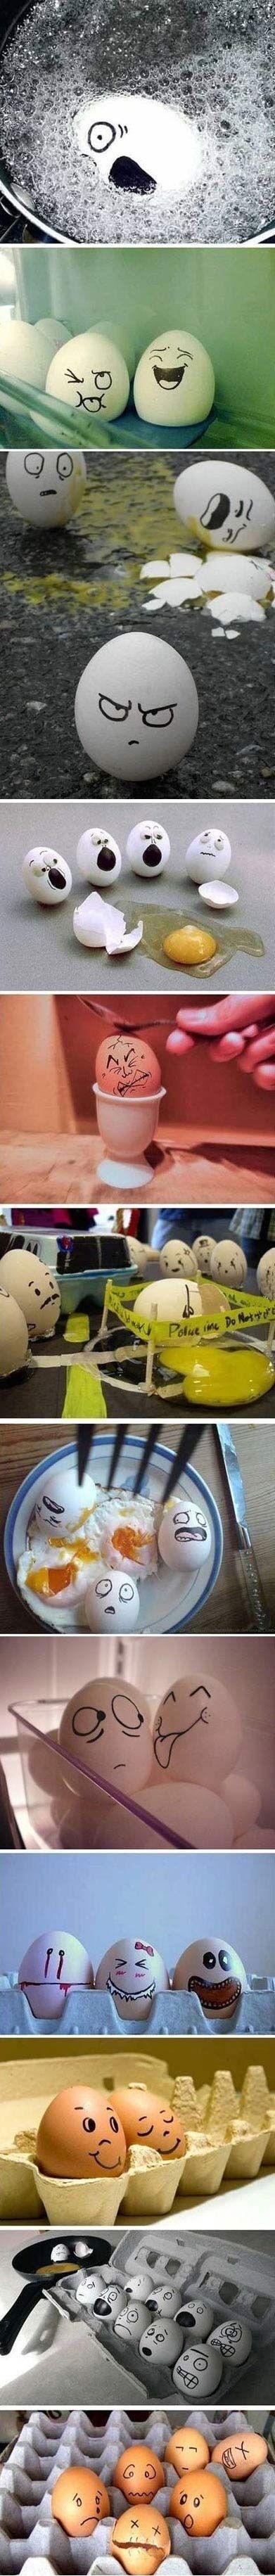 Creative Art With Eggs Which Will Blow Your Mind - meme